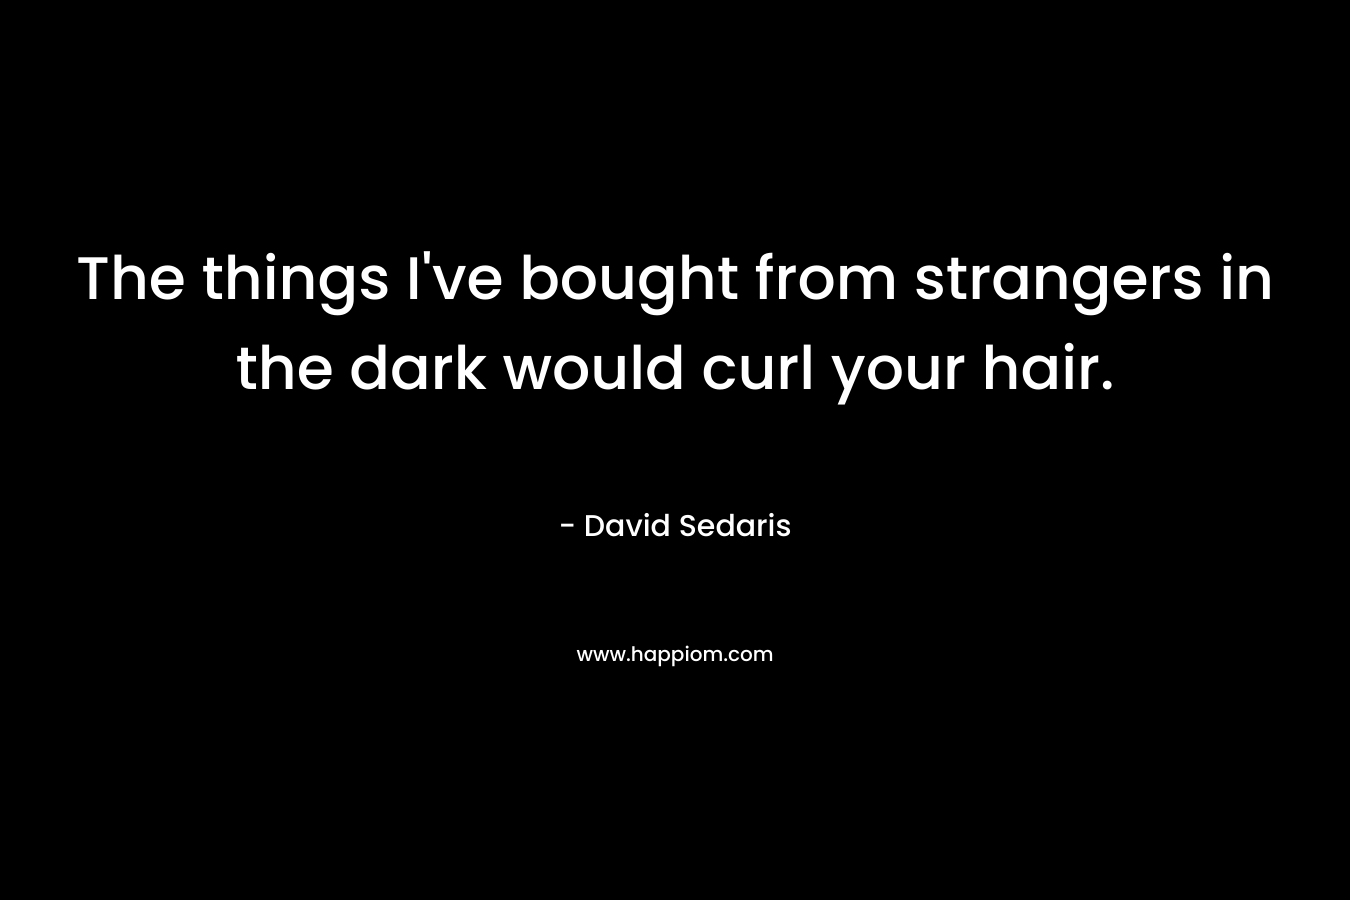 The things I’ve bought from strangers in the dark would curl your hair. – David Sedaris